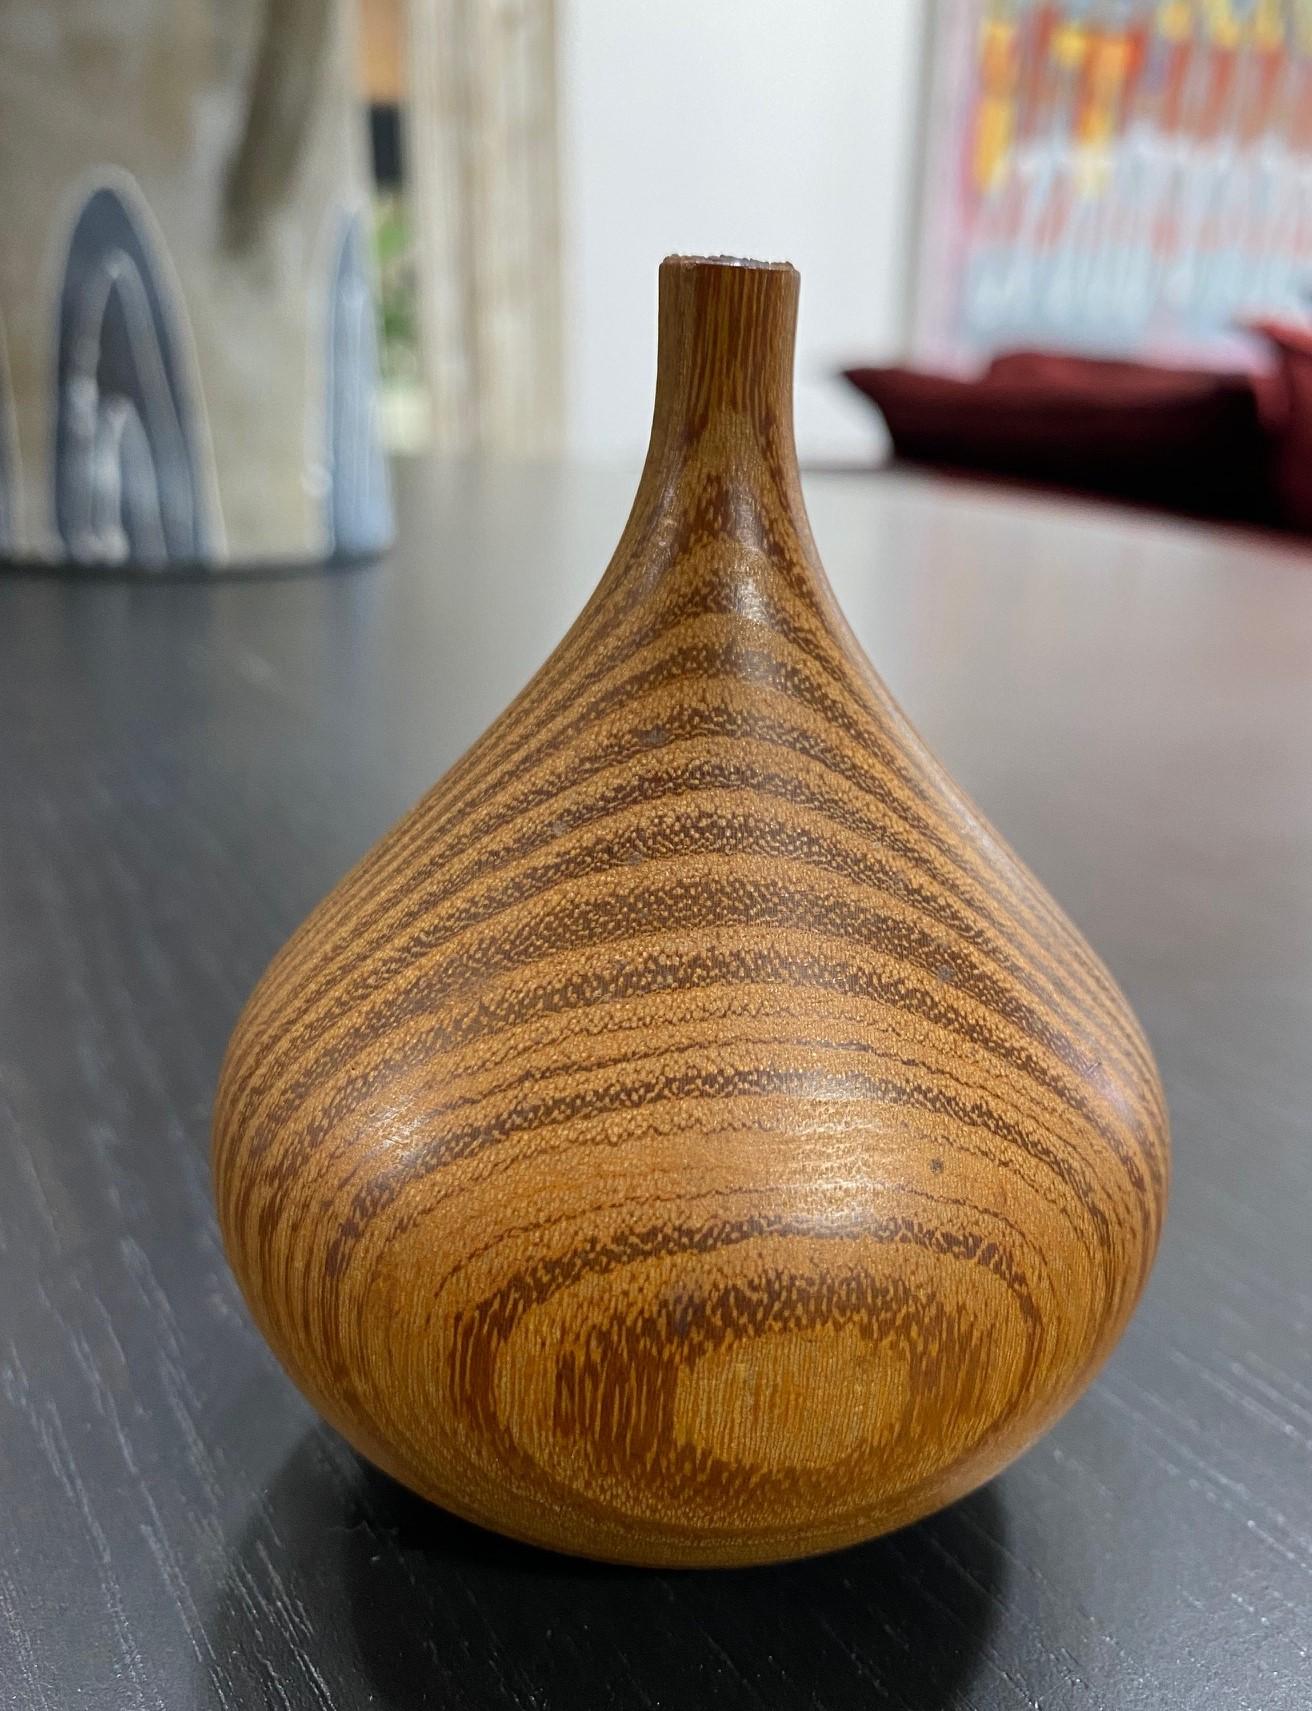 A beautifully executed, handmade, wood-turned weed vase by master woodturner Rude Osolnik who is widely regarded, along with Bob Stocksdale, as one of the finest woodturners in American woodturning history. In 1992, he was presented by then Kentucky